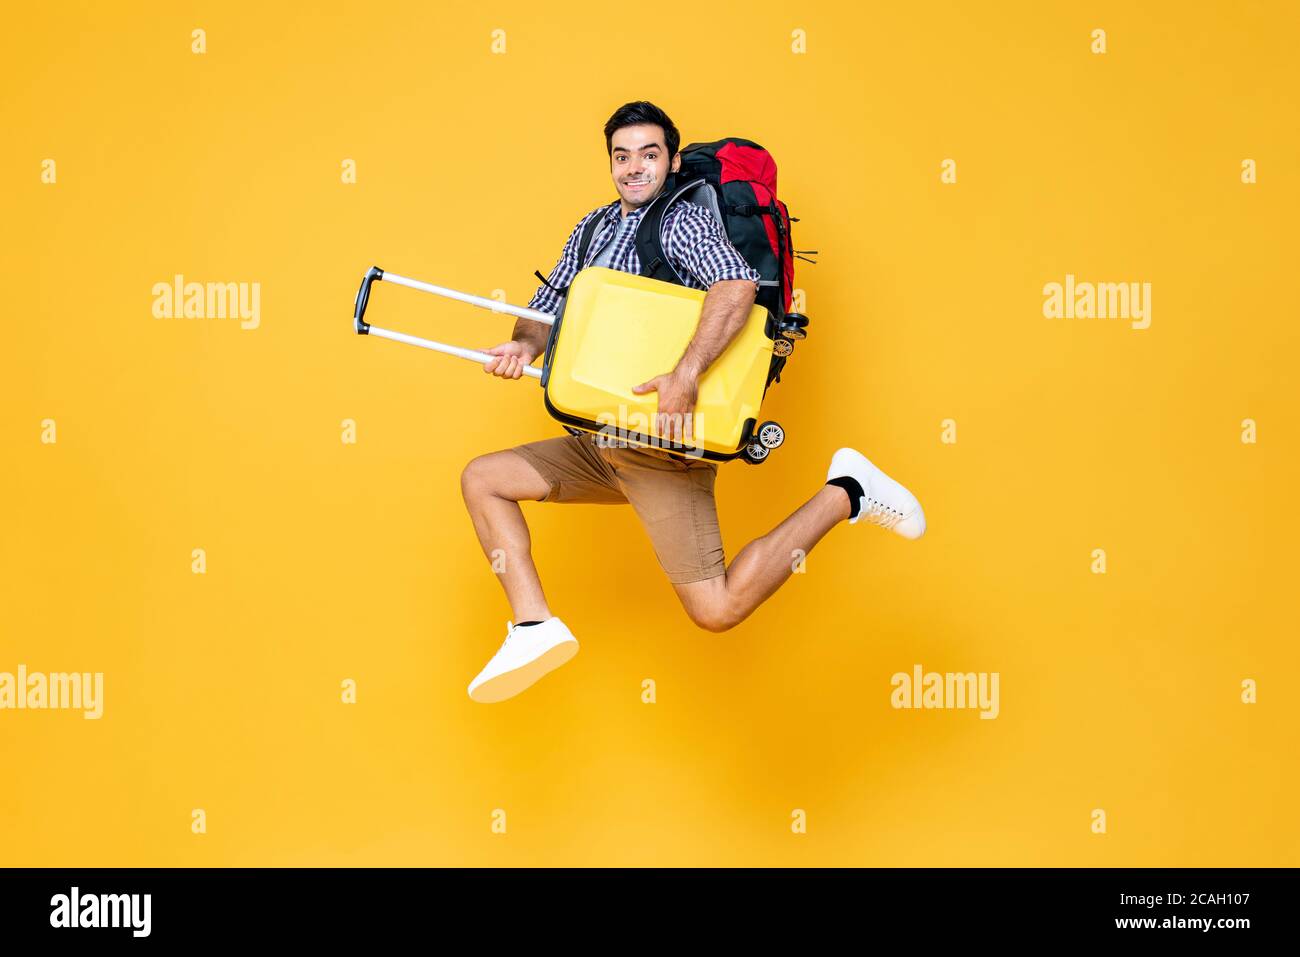 Young excited Caucasian male tourist with baggage jumping in mid-air ready to travel isolated on colorful studio yellow background Stock Photo